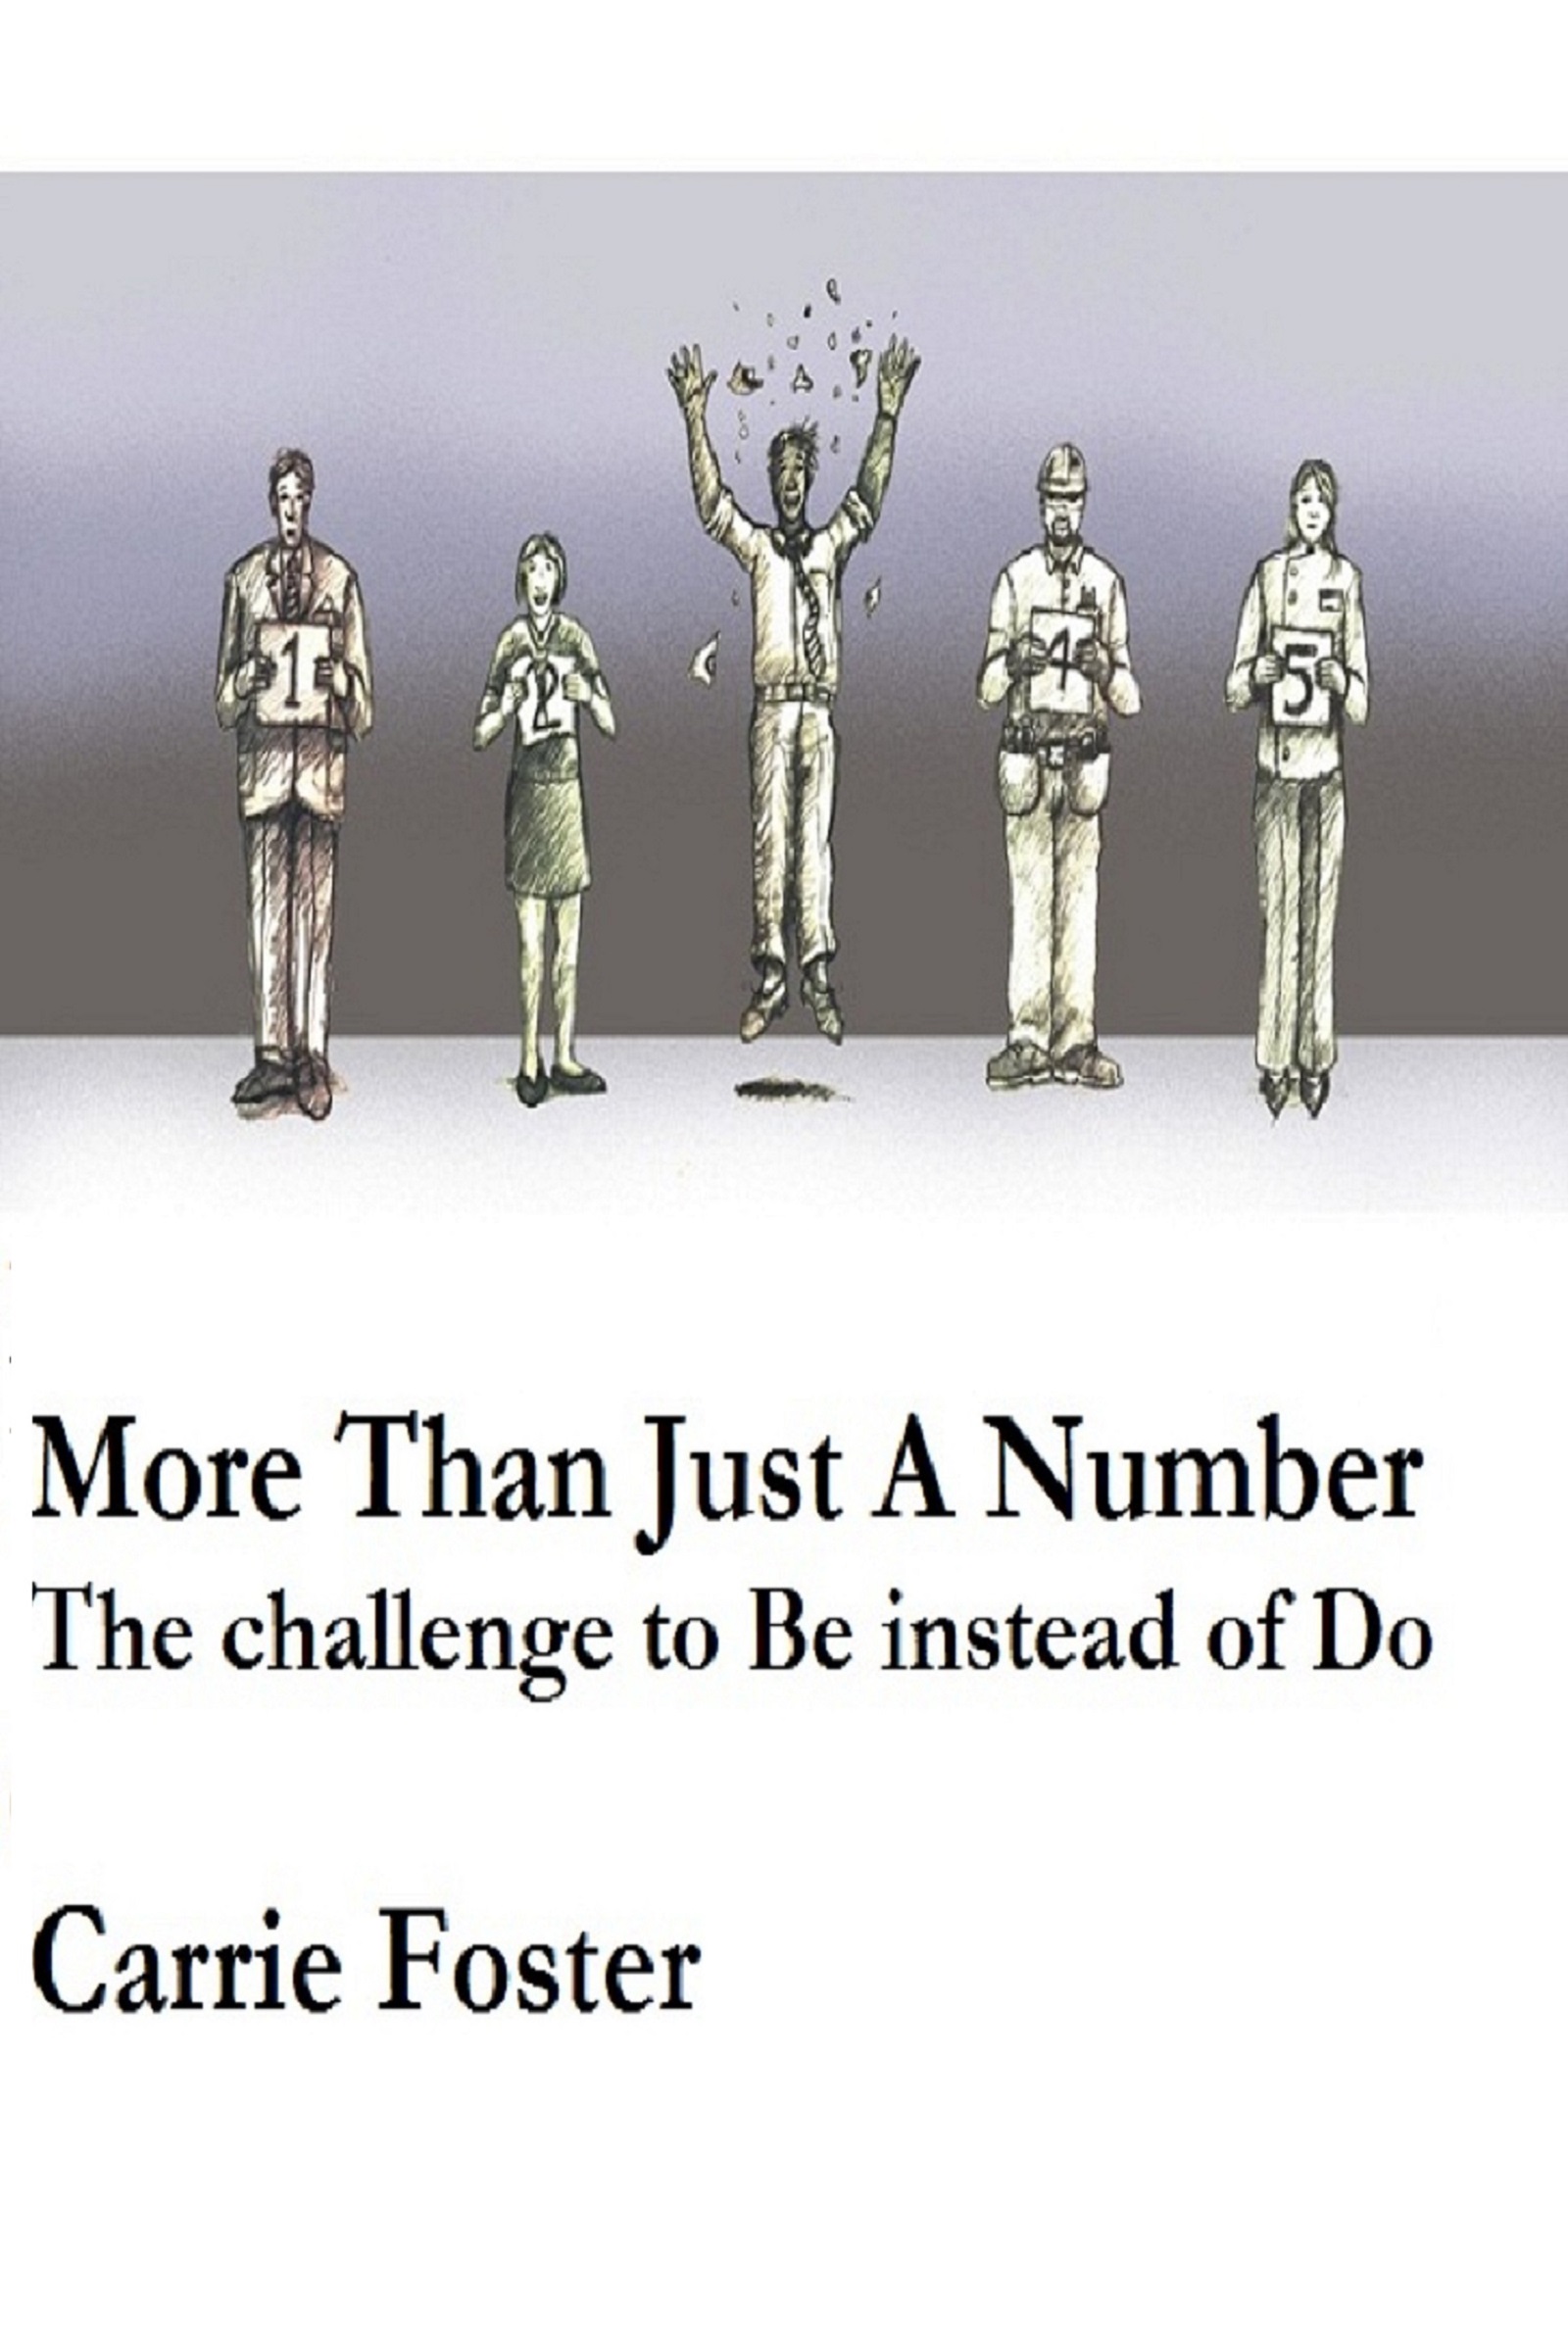 More Than Just A Number: The challenge to Be instead of Do